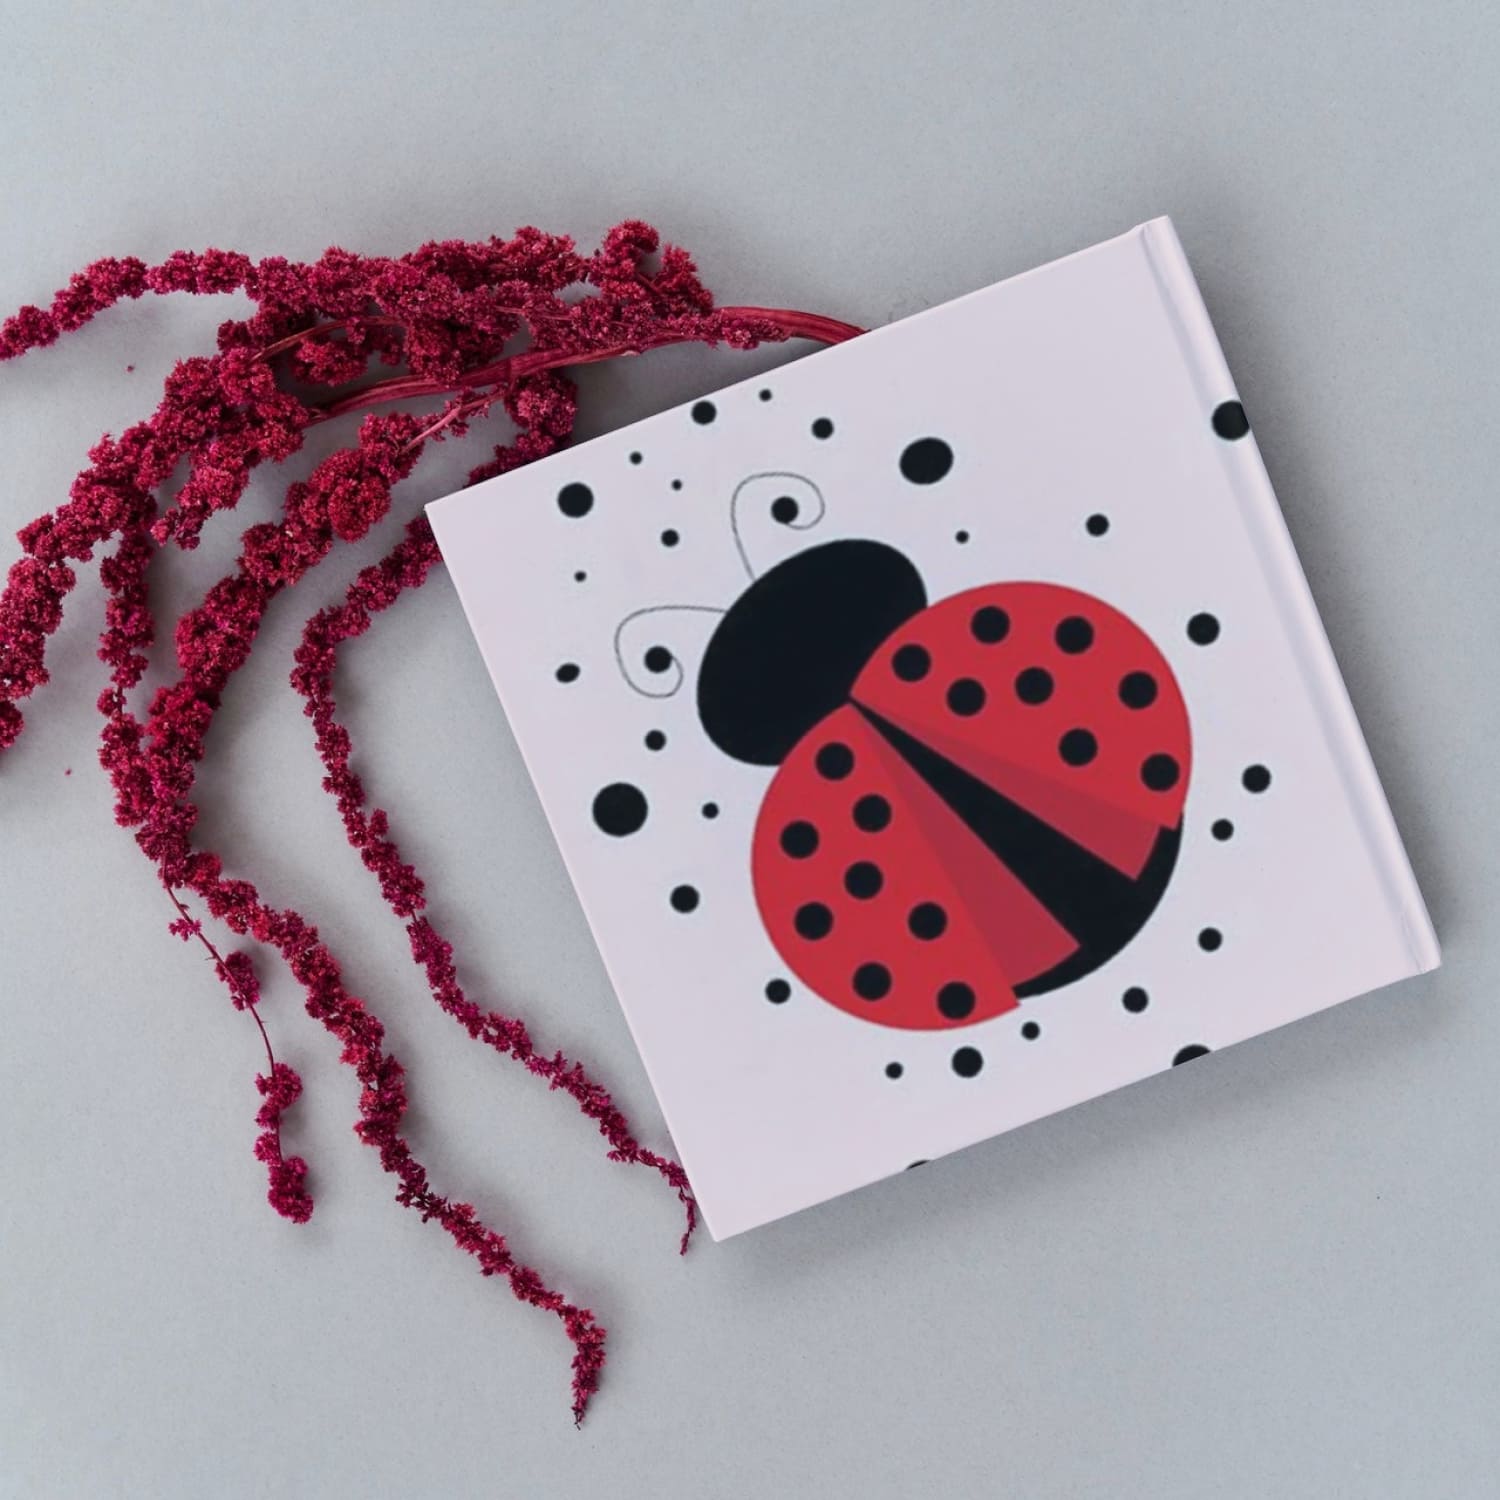 Red ladybug clipart Created By Fantasy Cliparts.